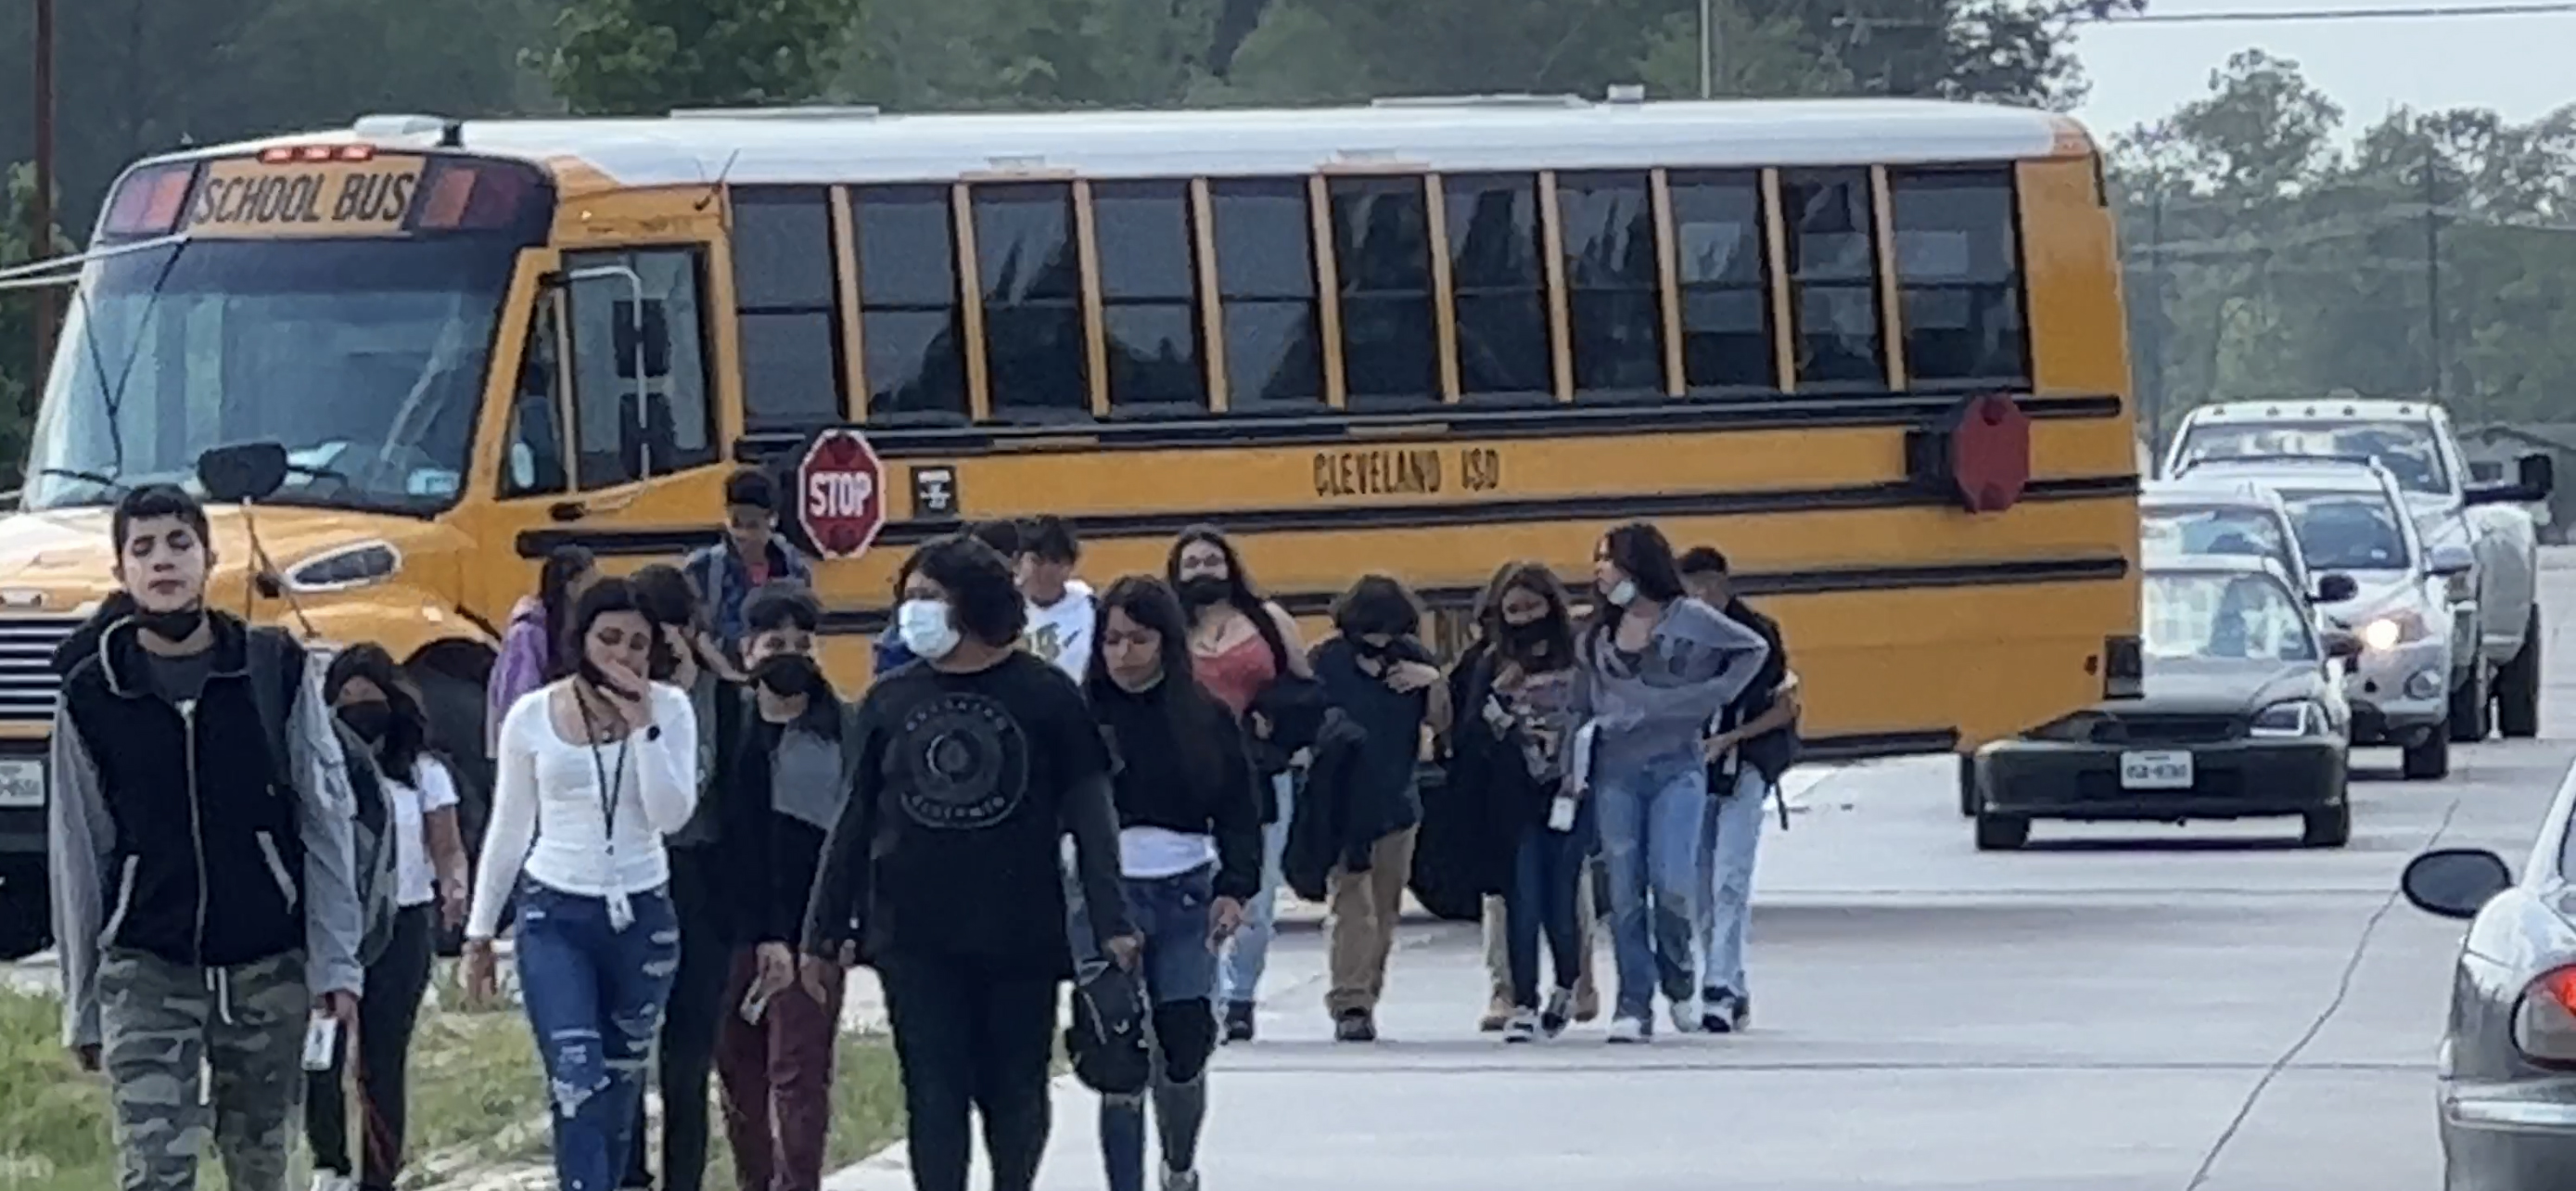 Cleveland Independent School District children returning to their homes in a scene played out daily in the rapidly expanding Colony Ridge community of Liberty County Texas